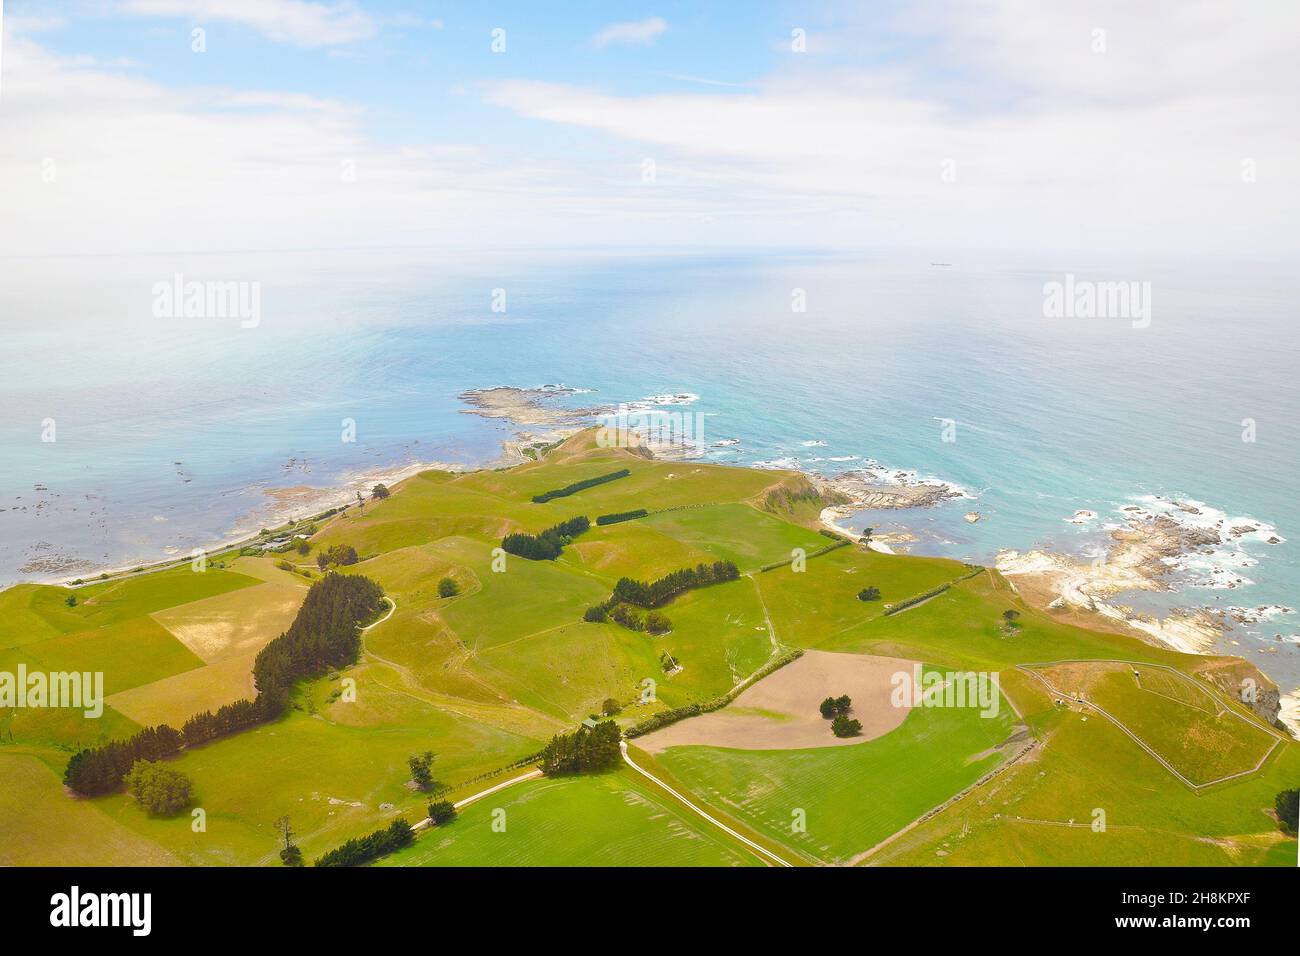 Arial view of Kaikoura, New Zealand. Taken from helicopter view. Stock Photo